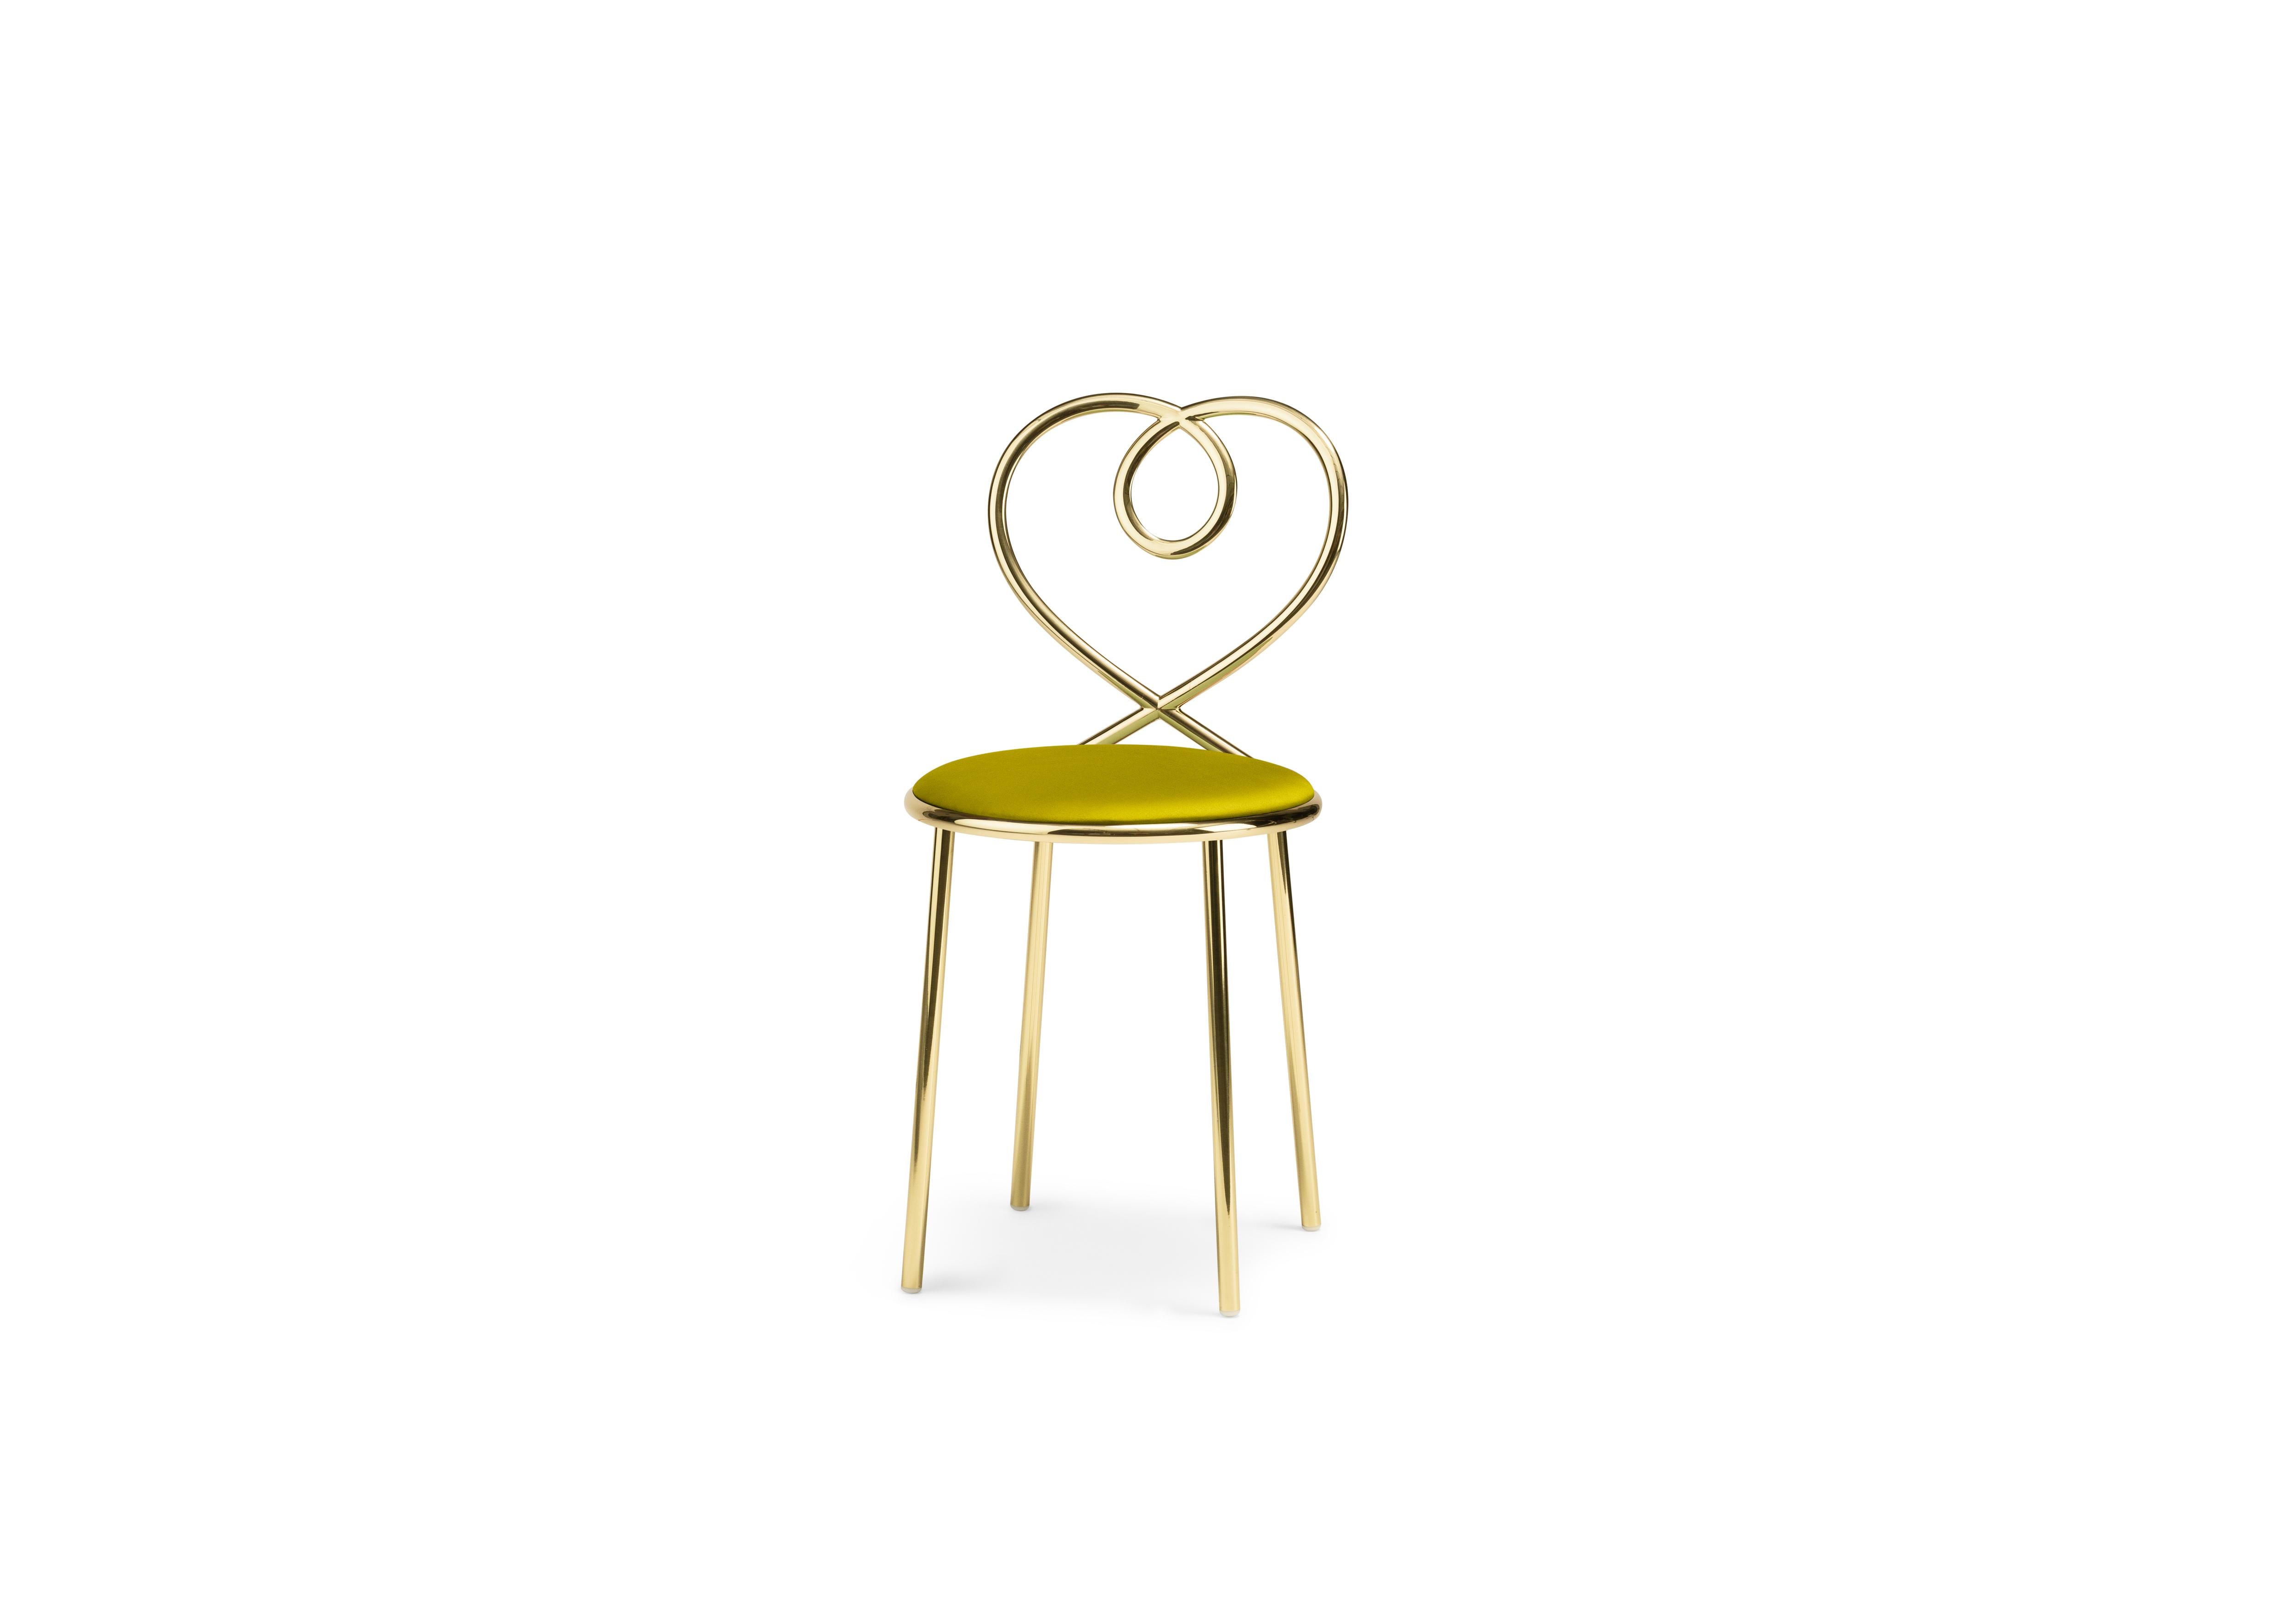 Love is all around. Clench yours tight, hold it close, and bestow on it the shiny perch it so wishes it deserved. Love chair for Ghidini 1961 provides a sumptuously soft landing for the love you¹ve decided to start domesticating. Seated on a pale